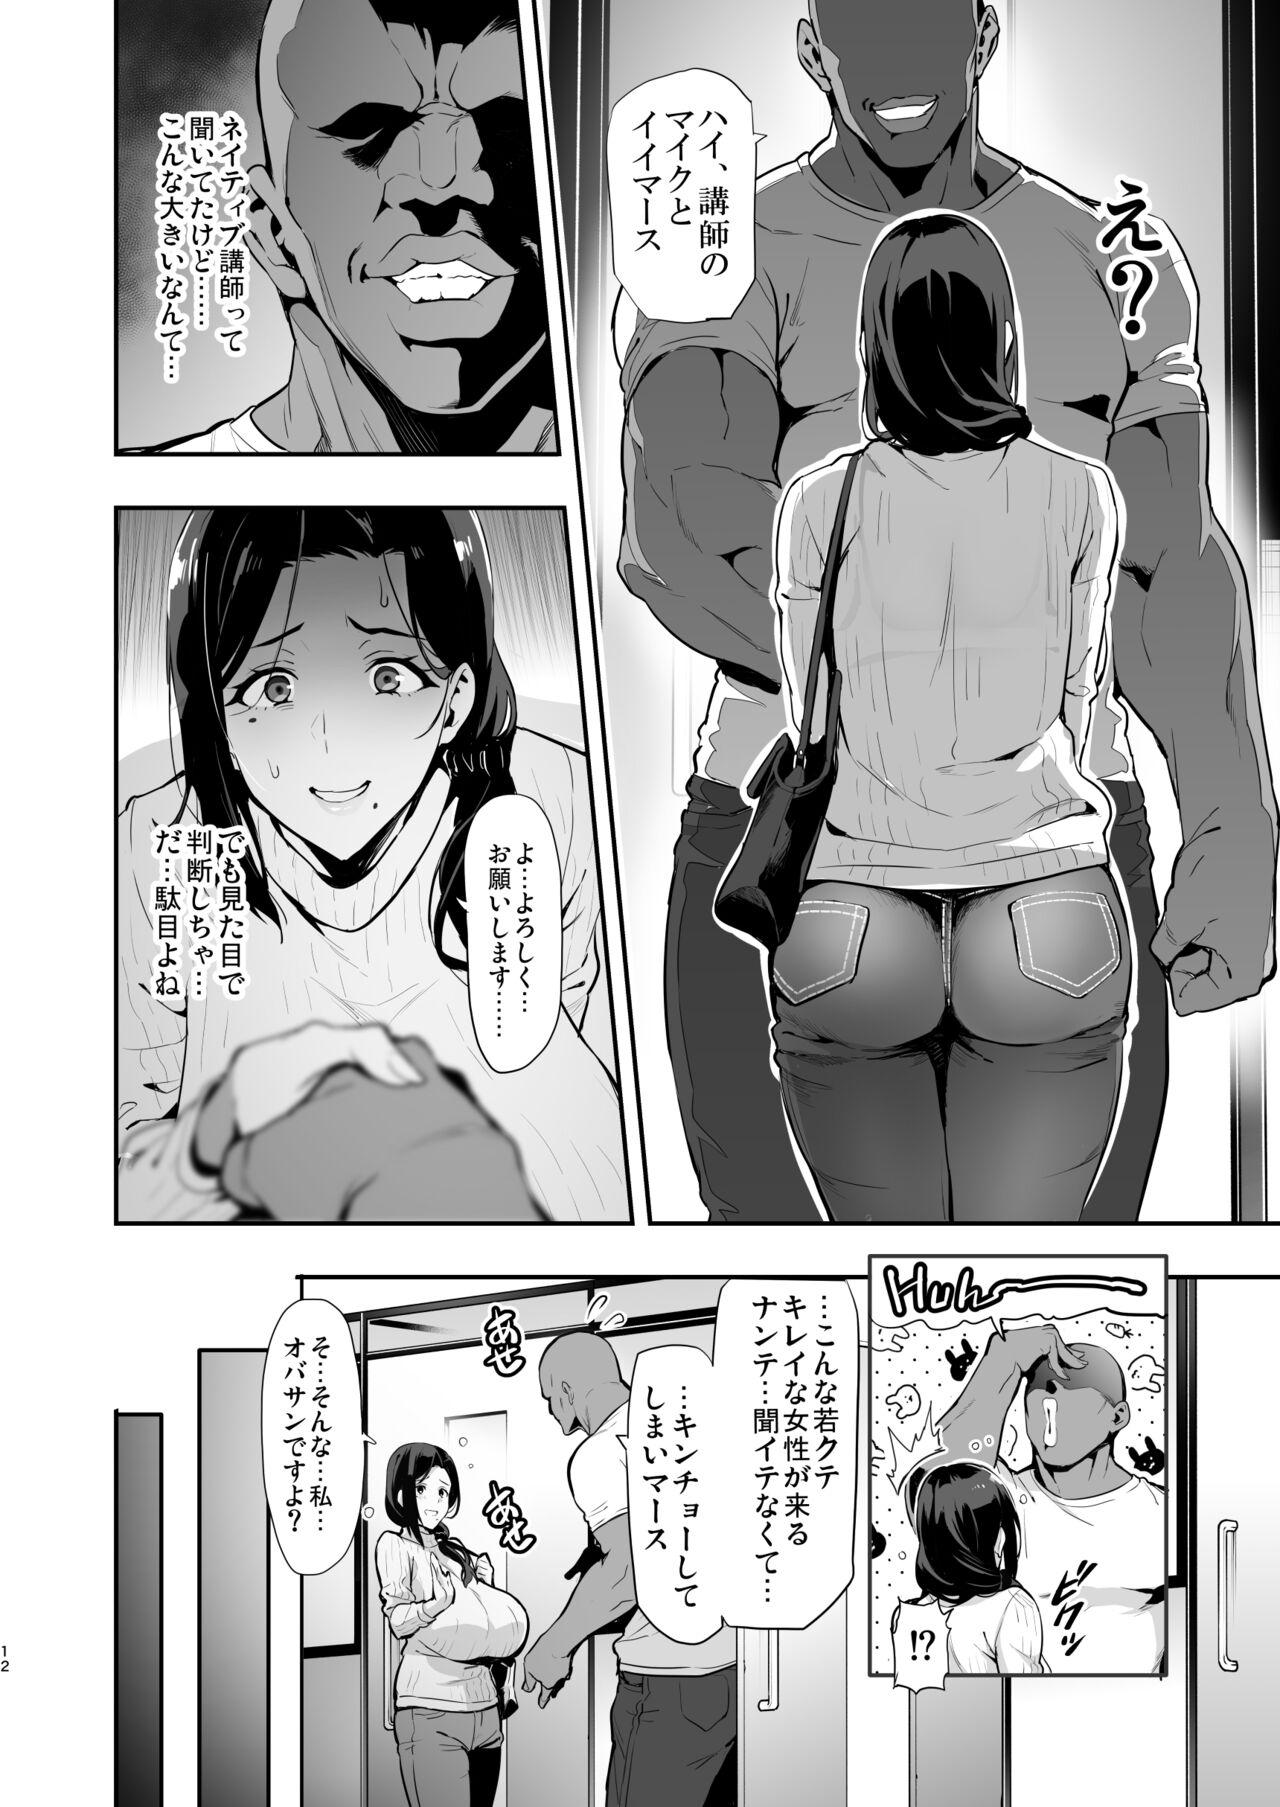 Best Blowjob Ever Weeping Les Cherry Blossoms Dark Hana Meku Passage 2209 Pussy - Page 10